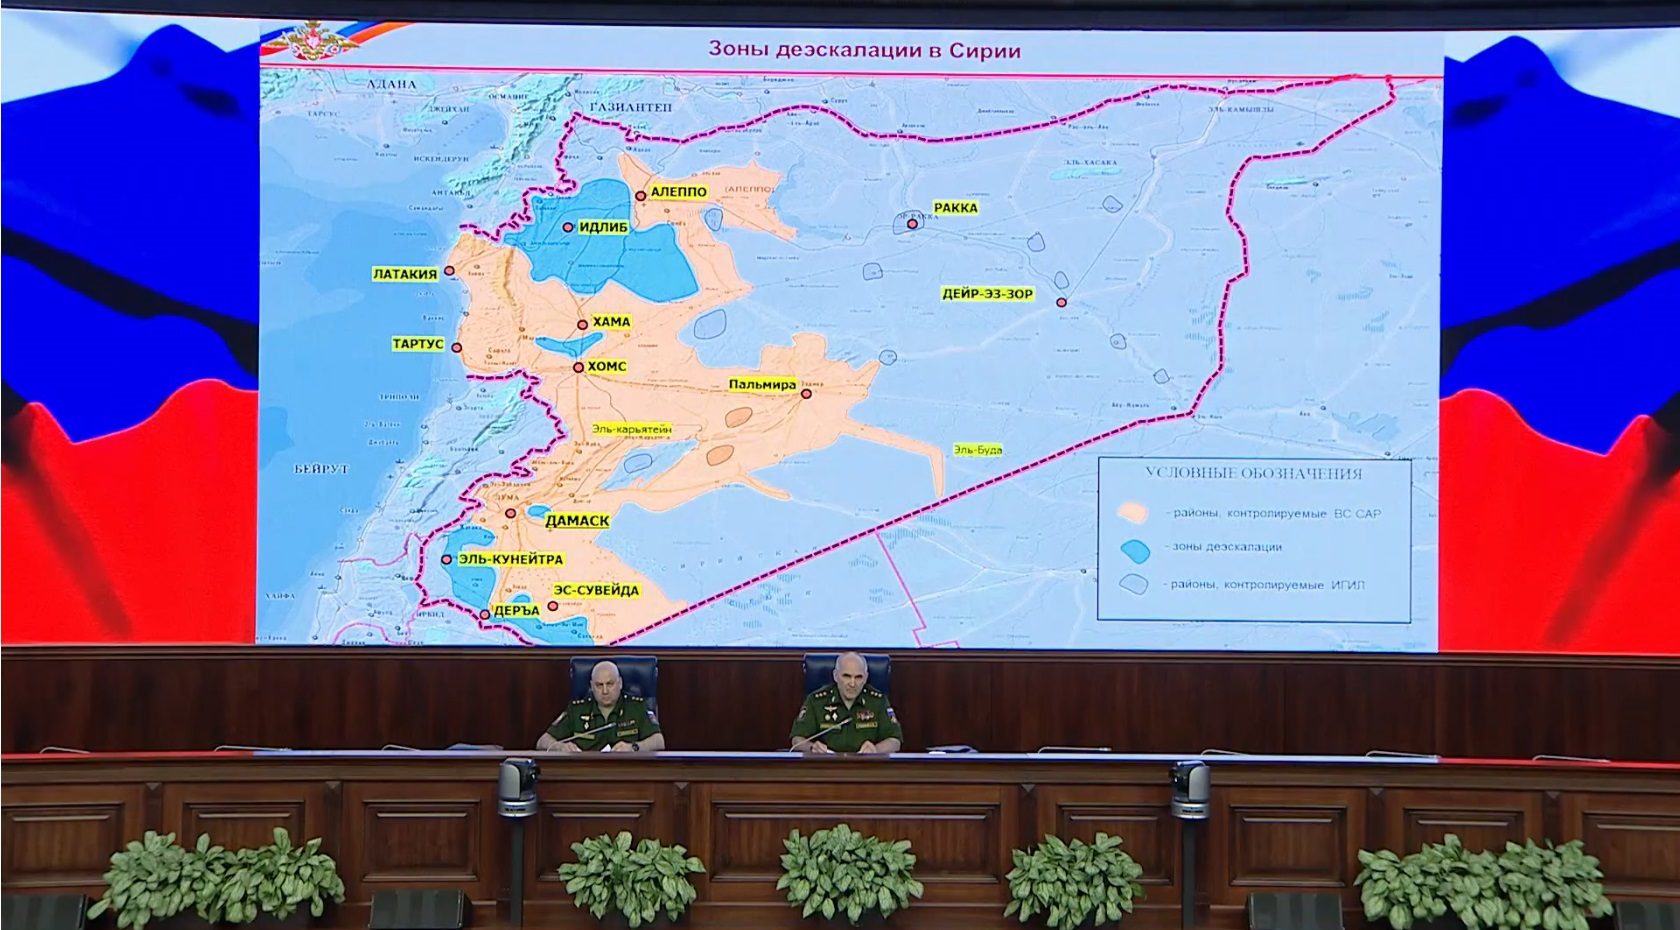 russian mod ministry of defense map syria iraq